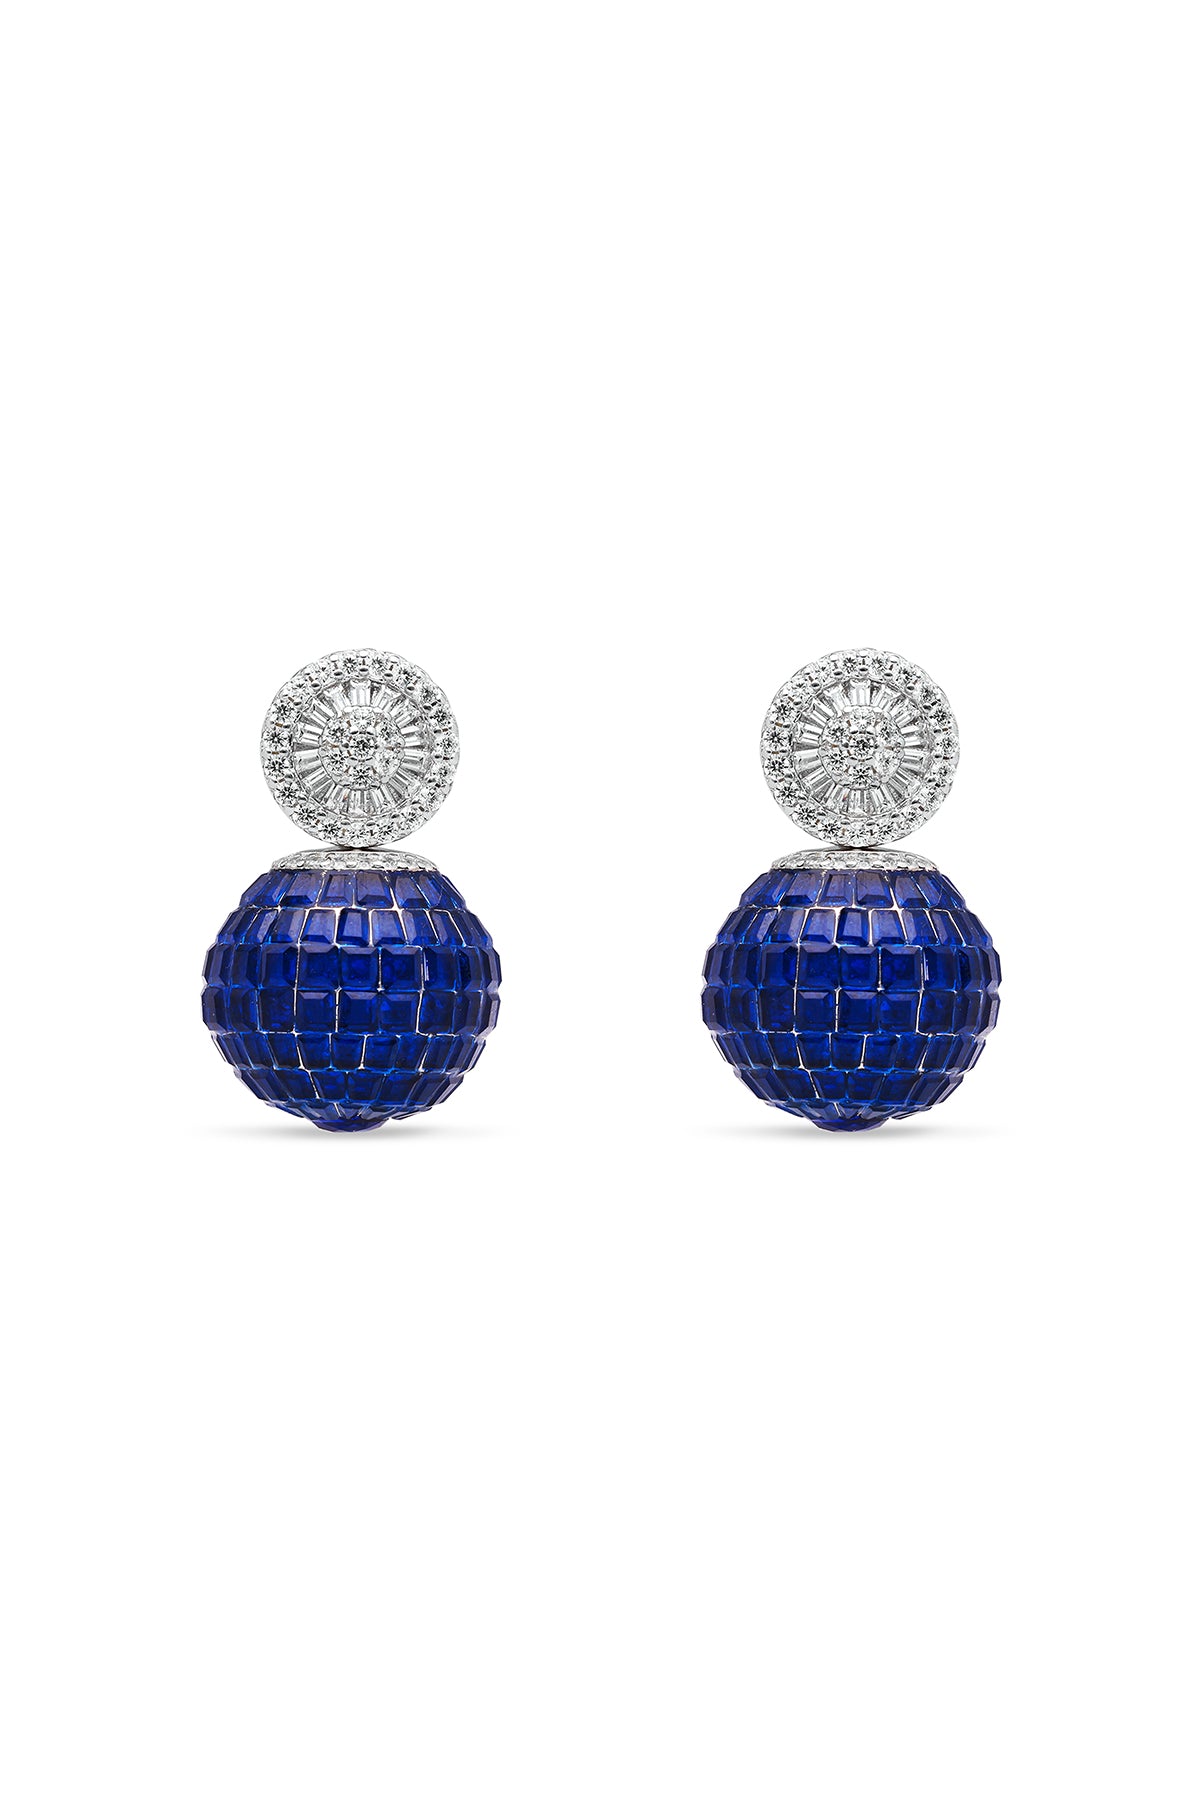 The Whimsy of the Bee Blue Sapphire Earrings